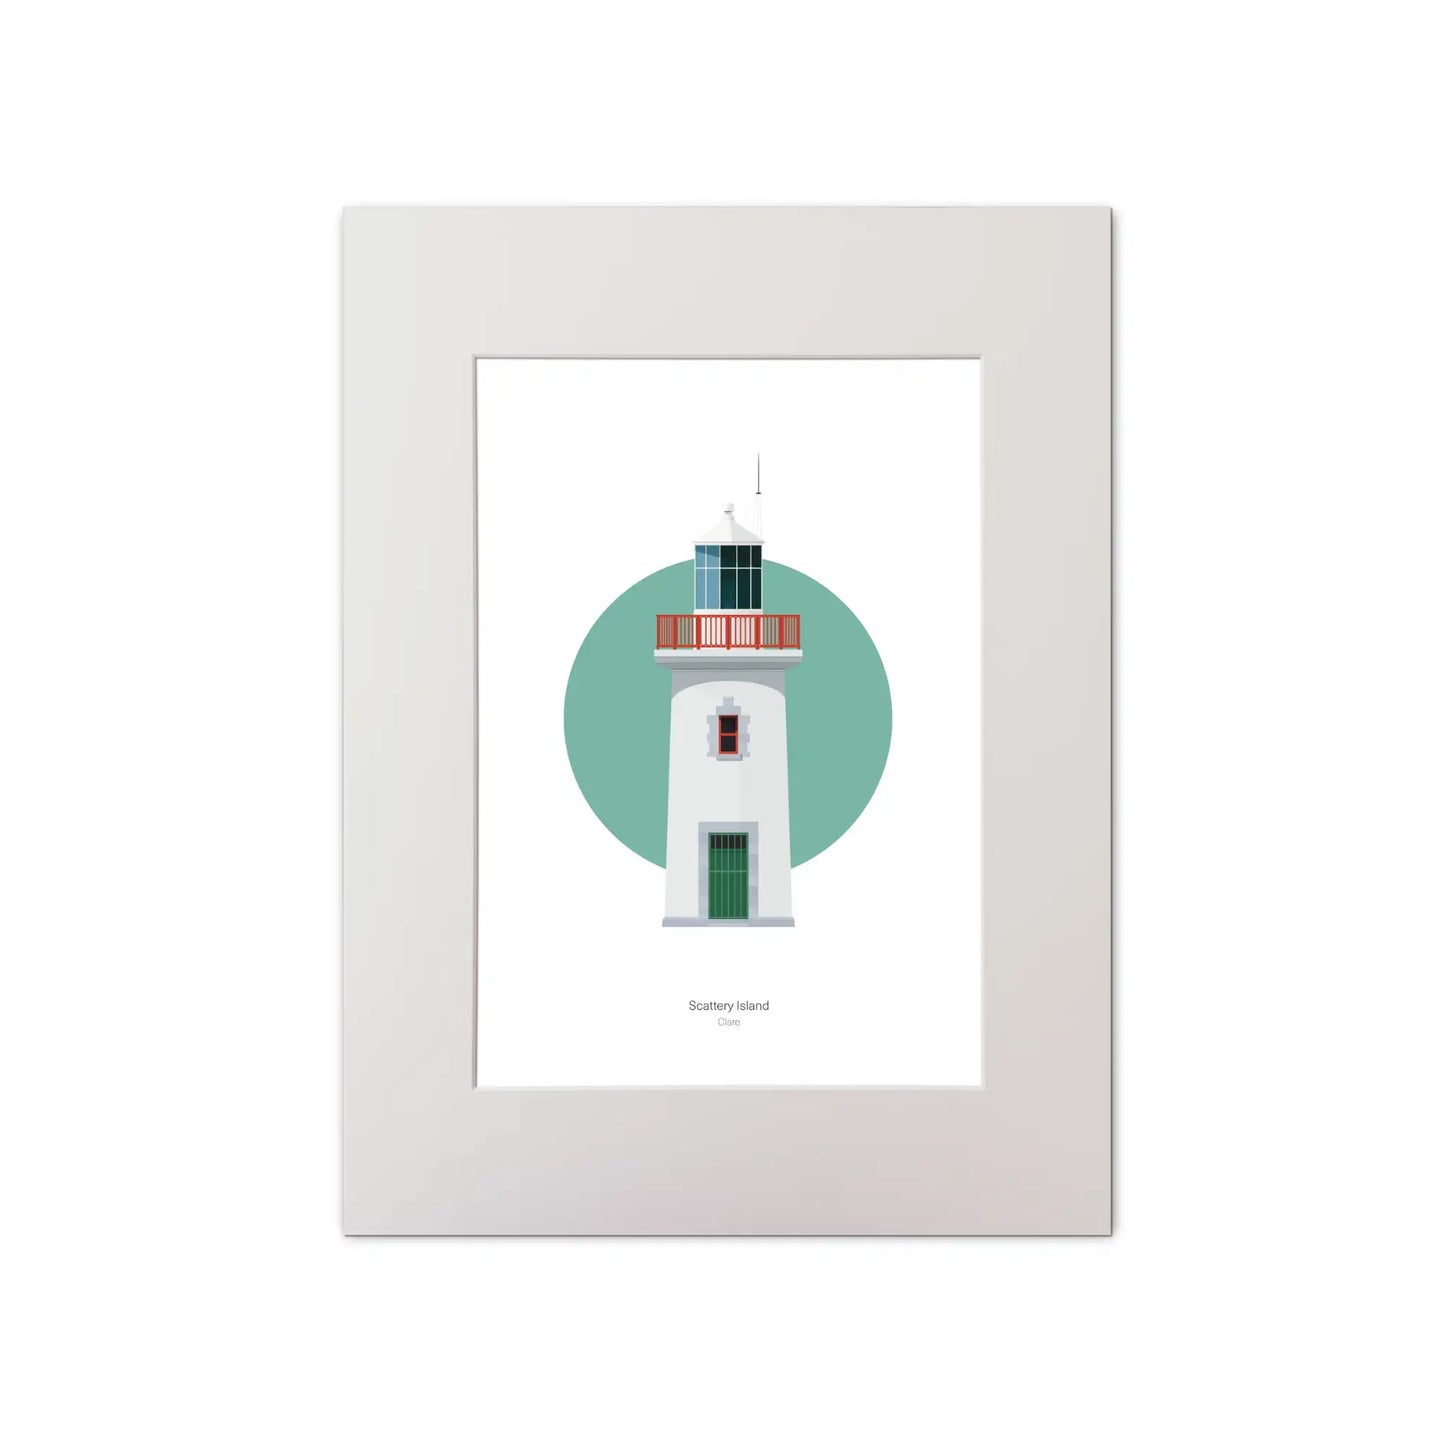 Contemporary graphic illustration of Scattery Island lighthouse on a white background inside light blue square, mounted and measuring 30x40cm.